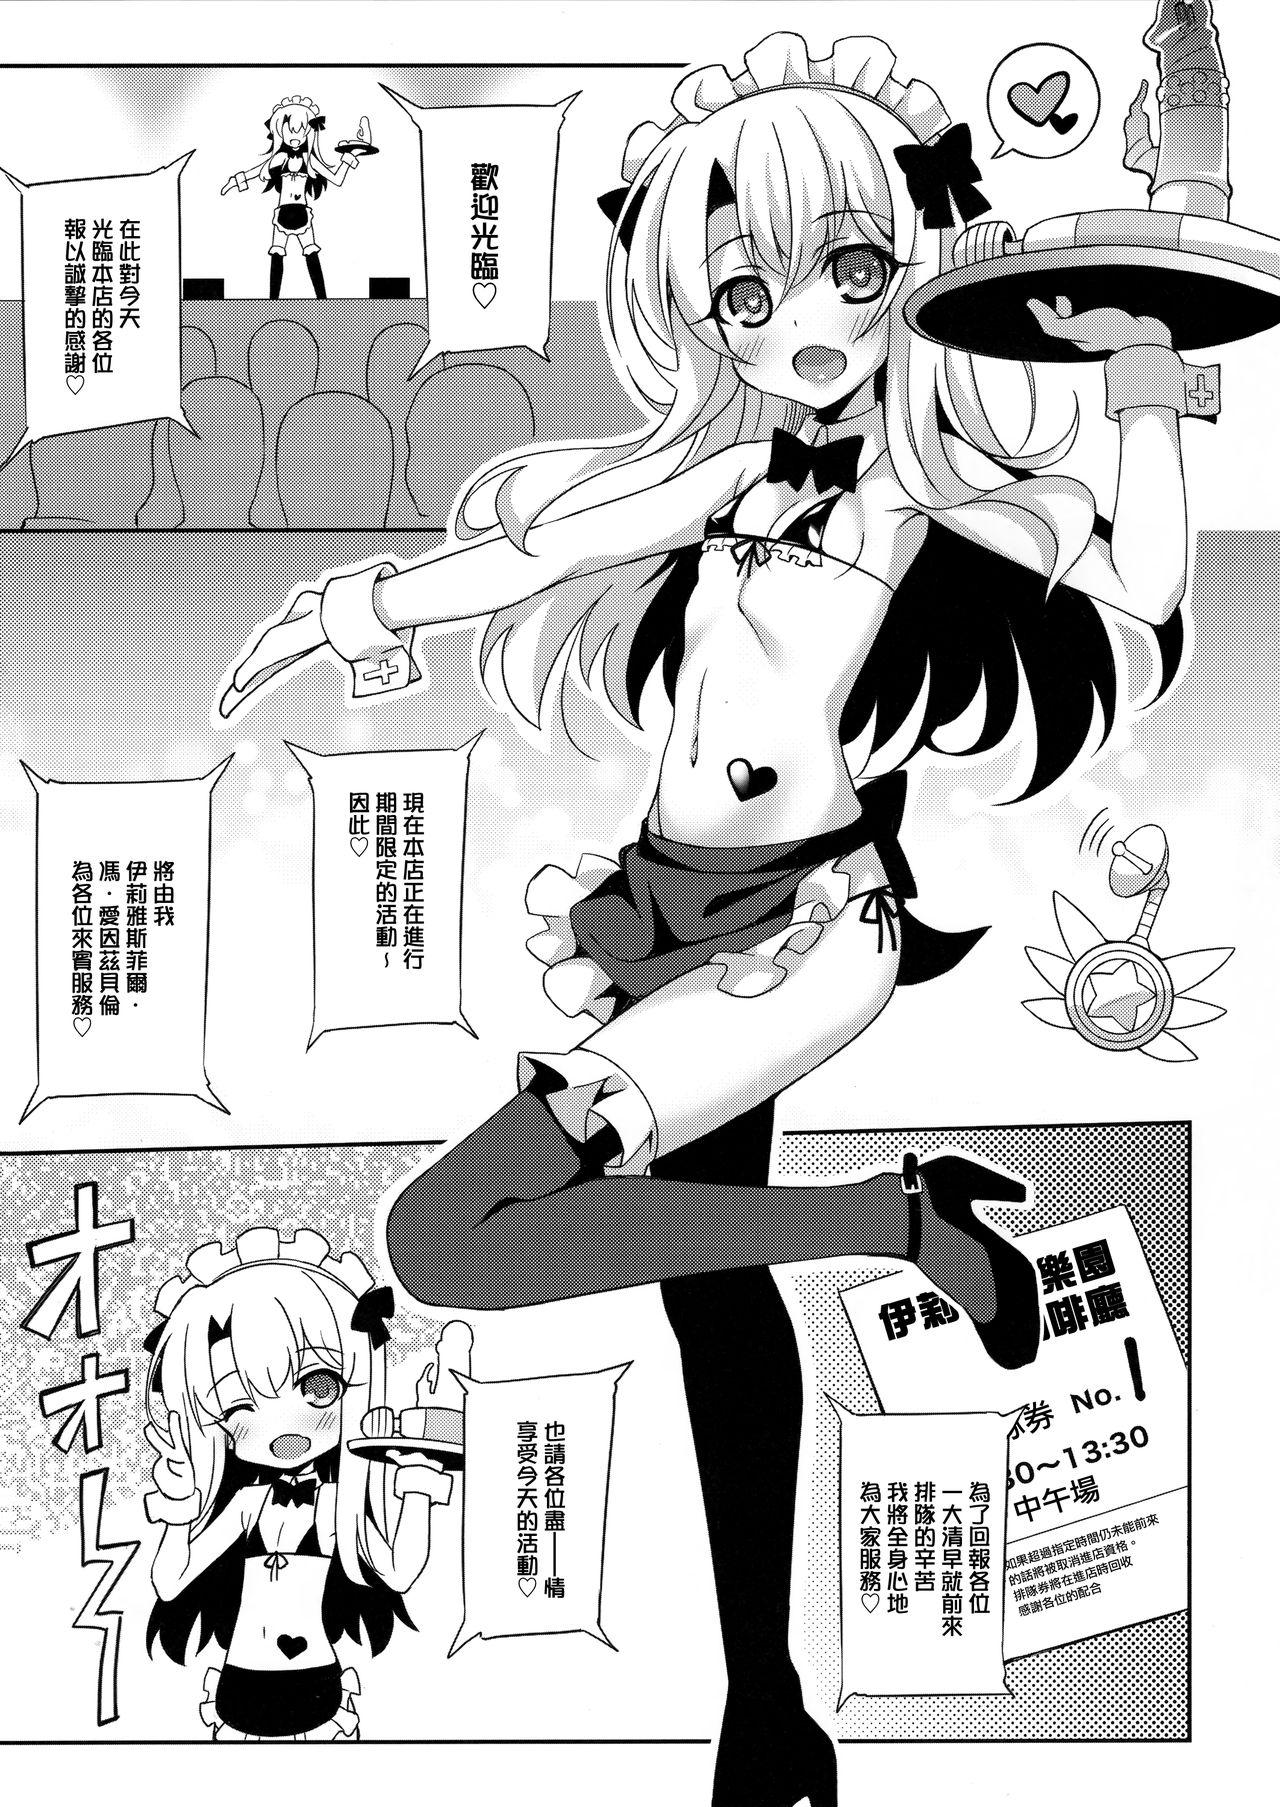 Solo Illy Asobi Cafe - Fate kaleid liner prisma illya Butt - Page 4